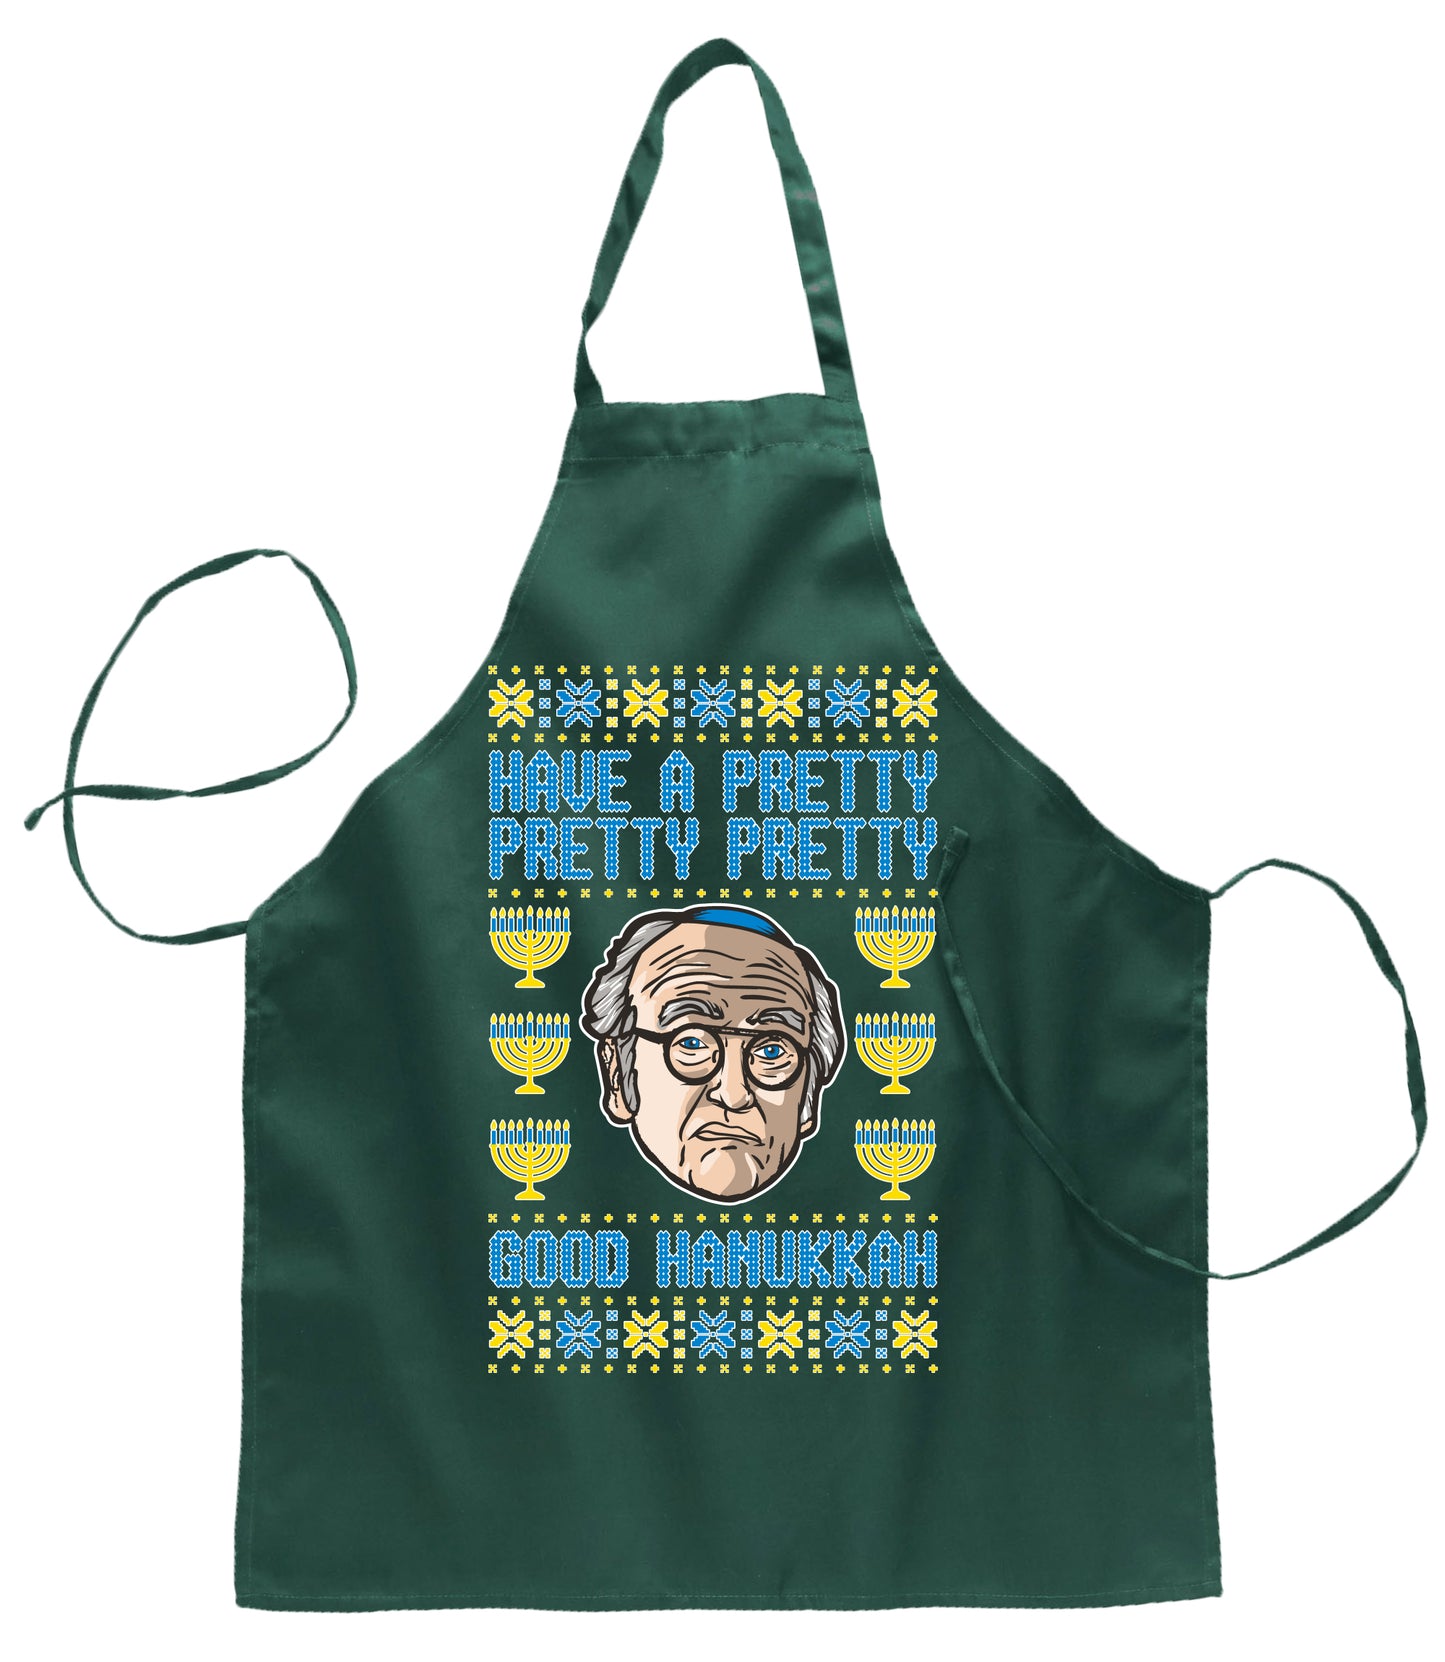 Ugly Ugly Christmas Have a Pretty Pretty Pretty Good Hanukkah Curb Larry Hanukkah Christmas Ugly Christmas Sweater Ugly Christmas Butcher Graphic Apron for Kitchen BBQ Grilling Cooking